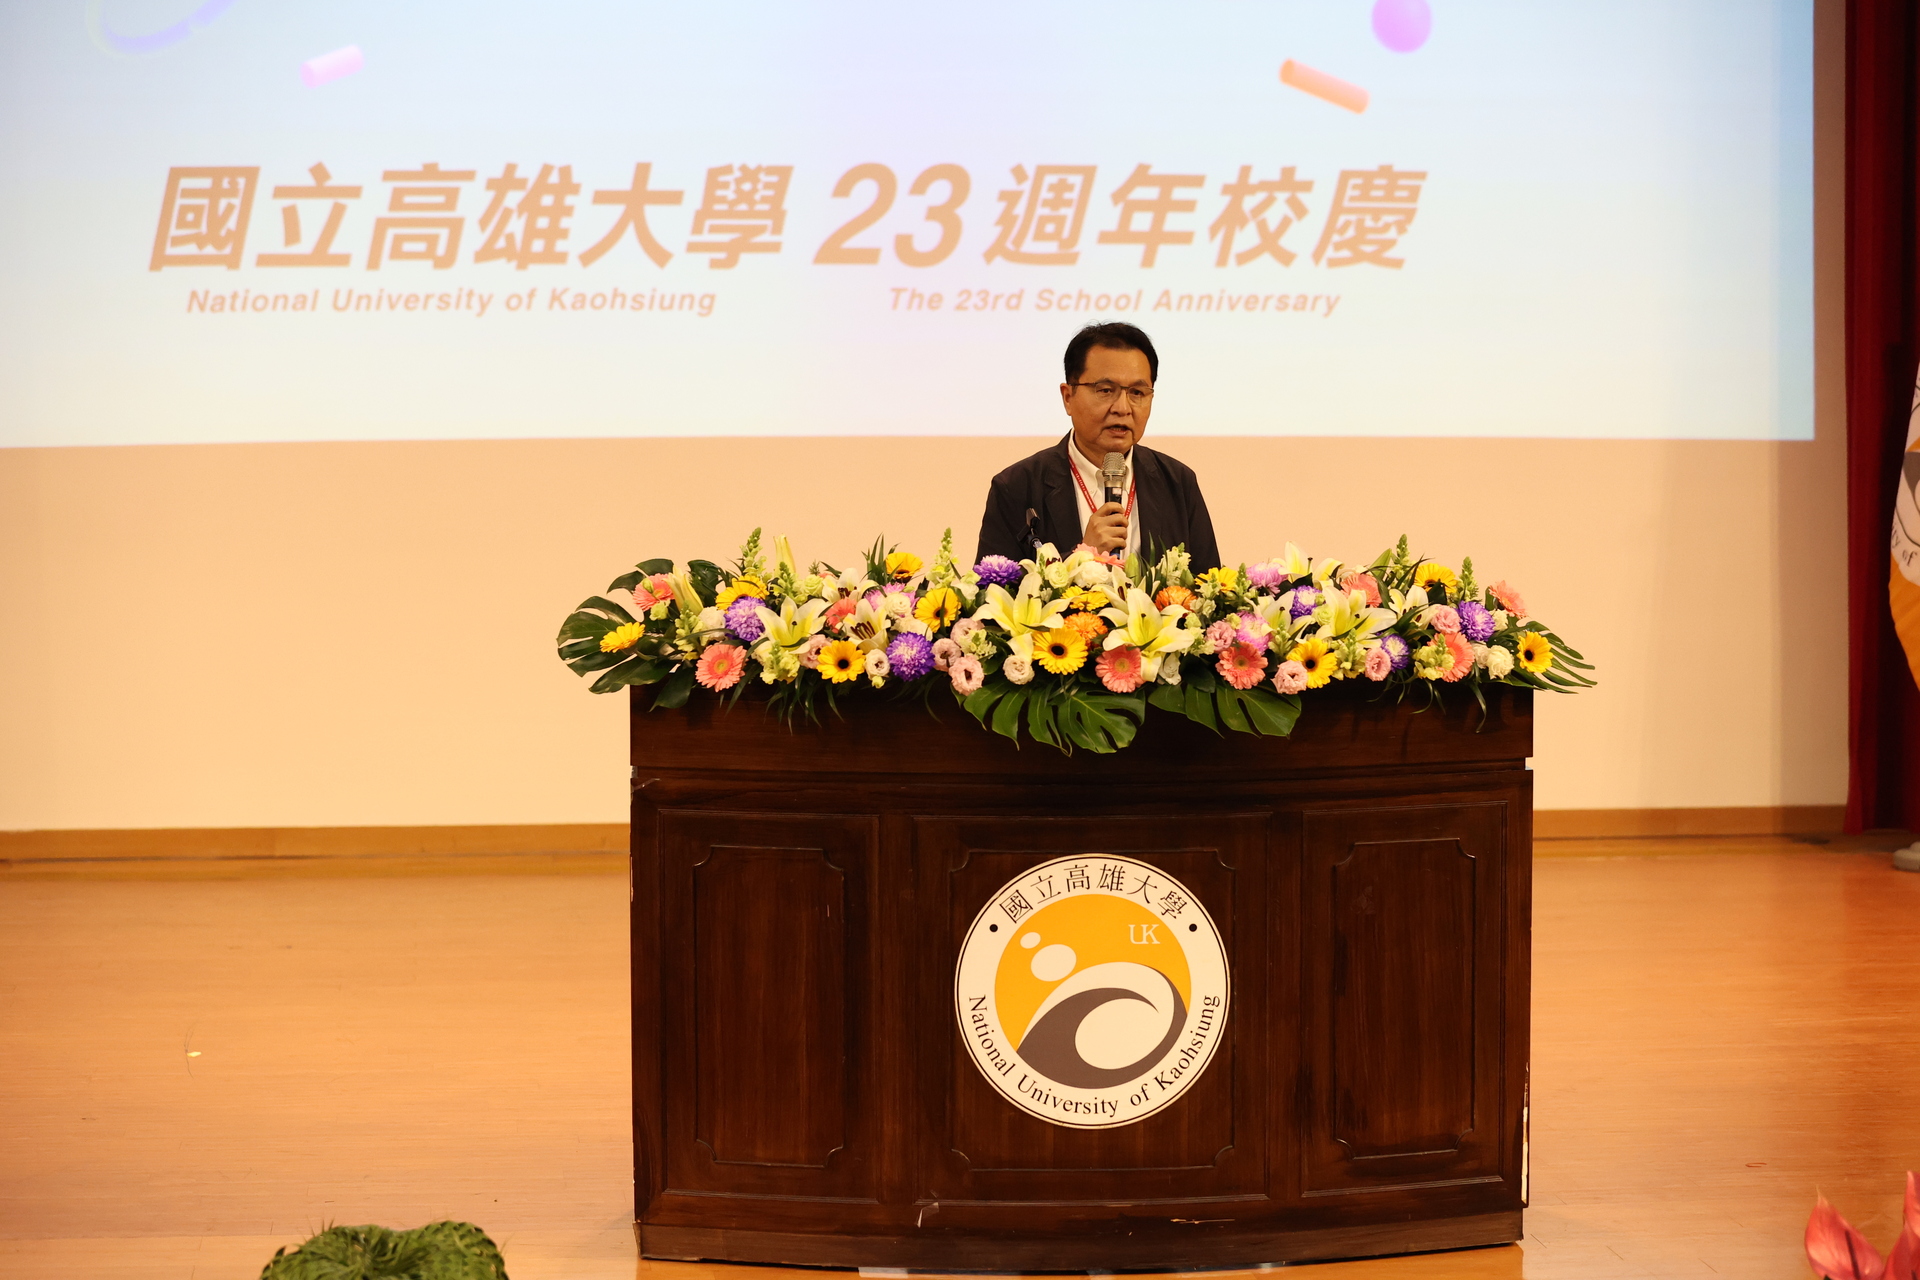 Po-Jen Hsiao, deputy executive director of the Information Industry Promotion Association delivered a speech